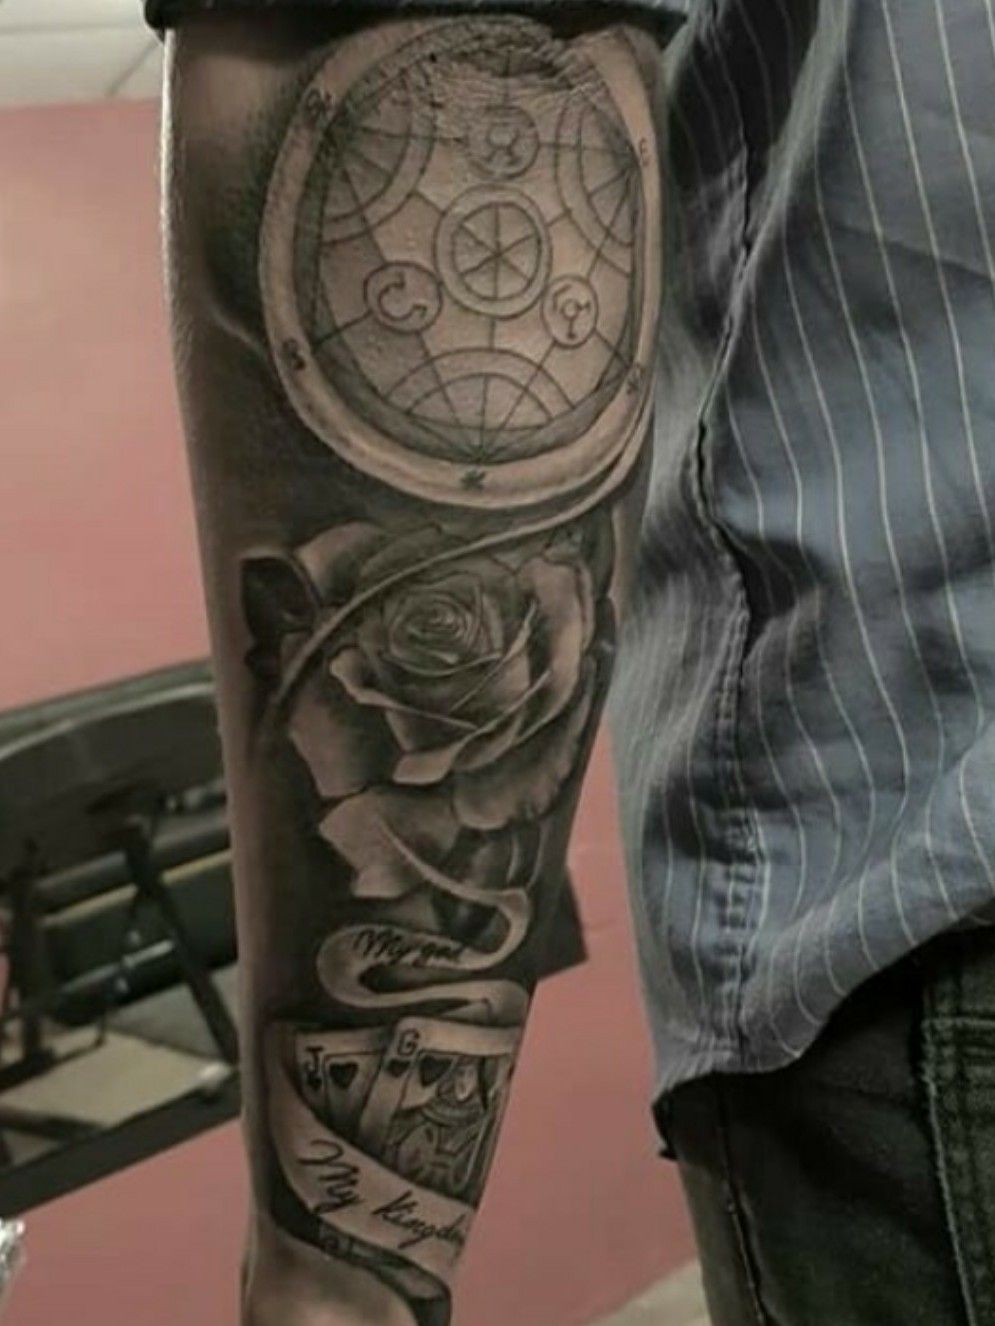 The Fullmetal Alchemist Symbol FMA Symbol and Tattoo What Do They Mean